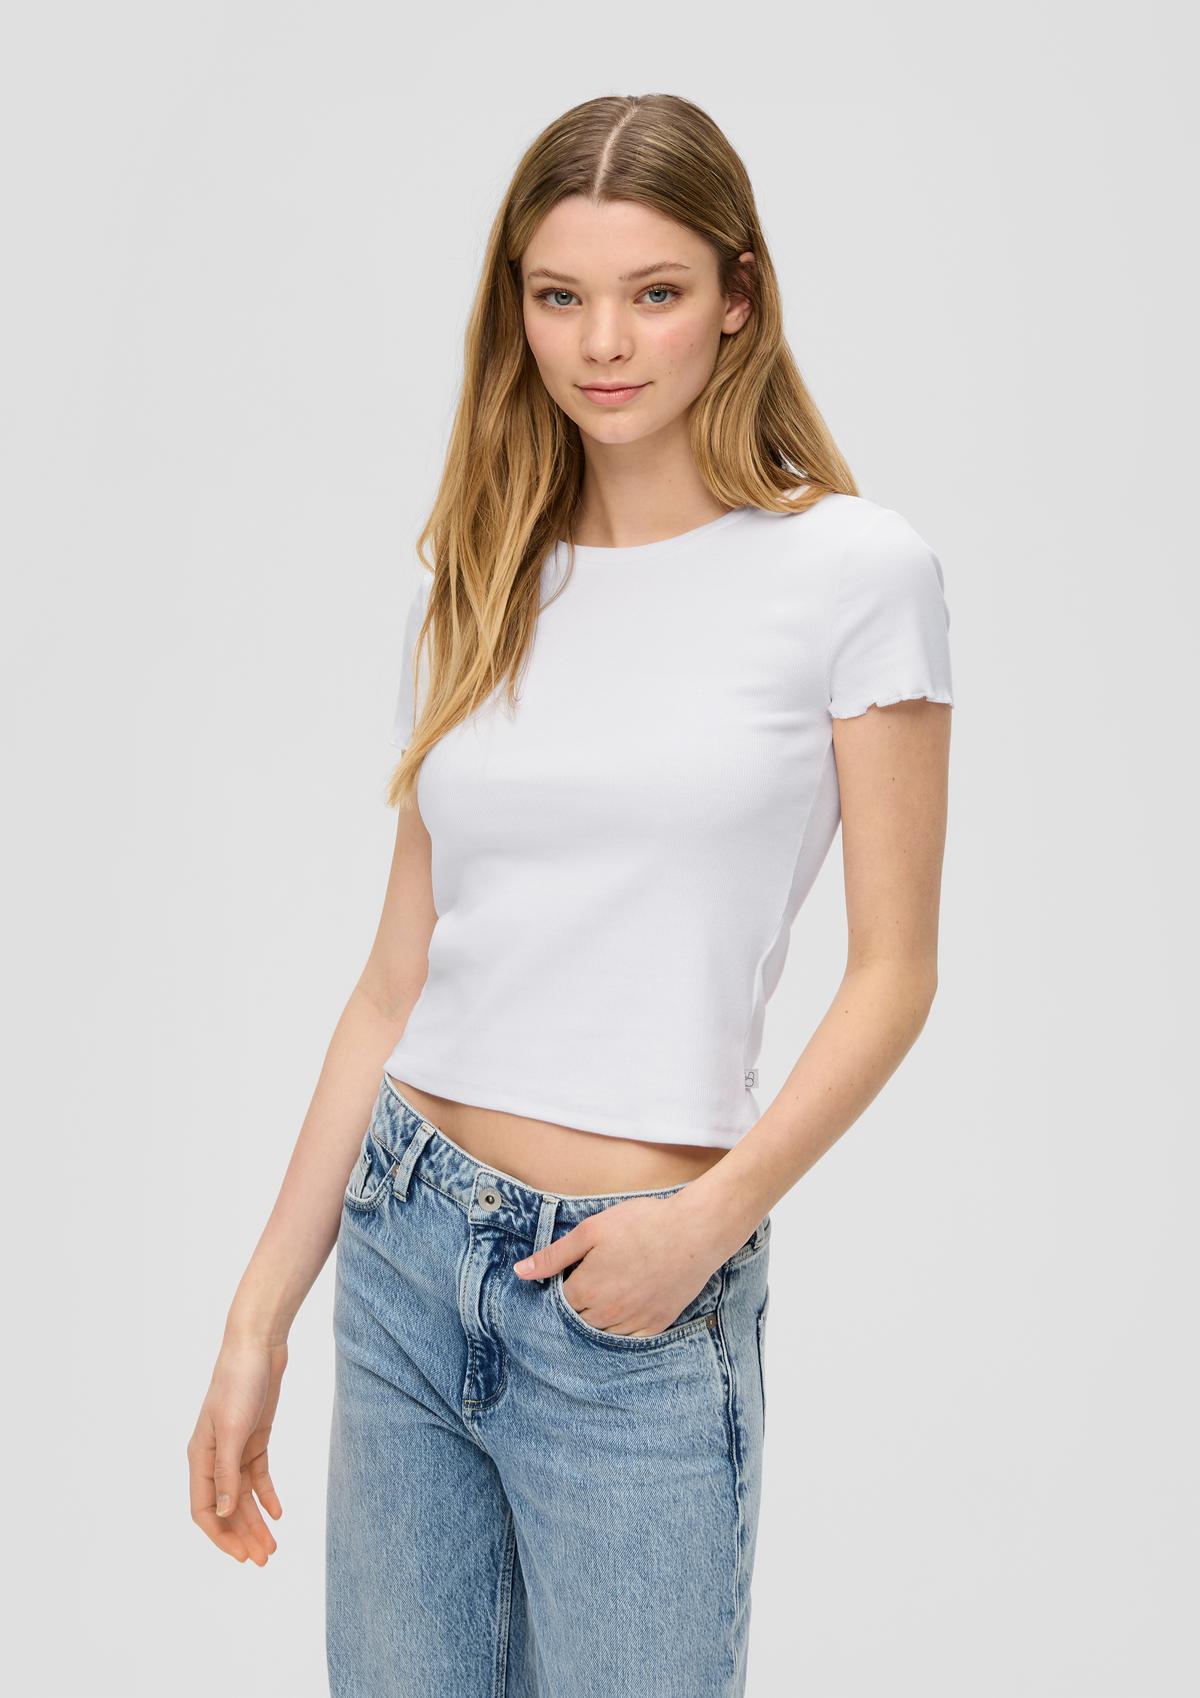 Cropped top with a ribbed texture